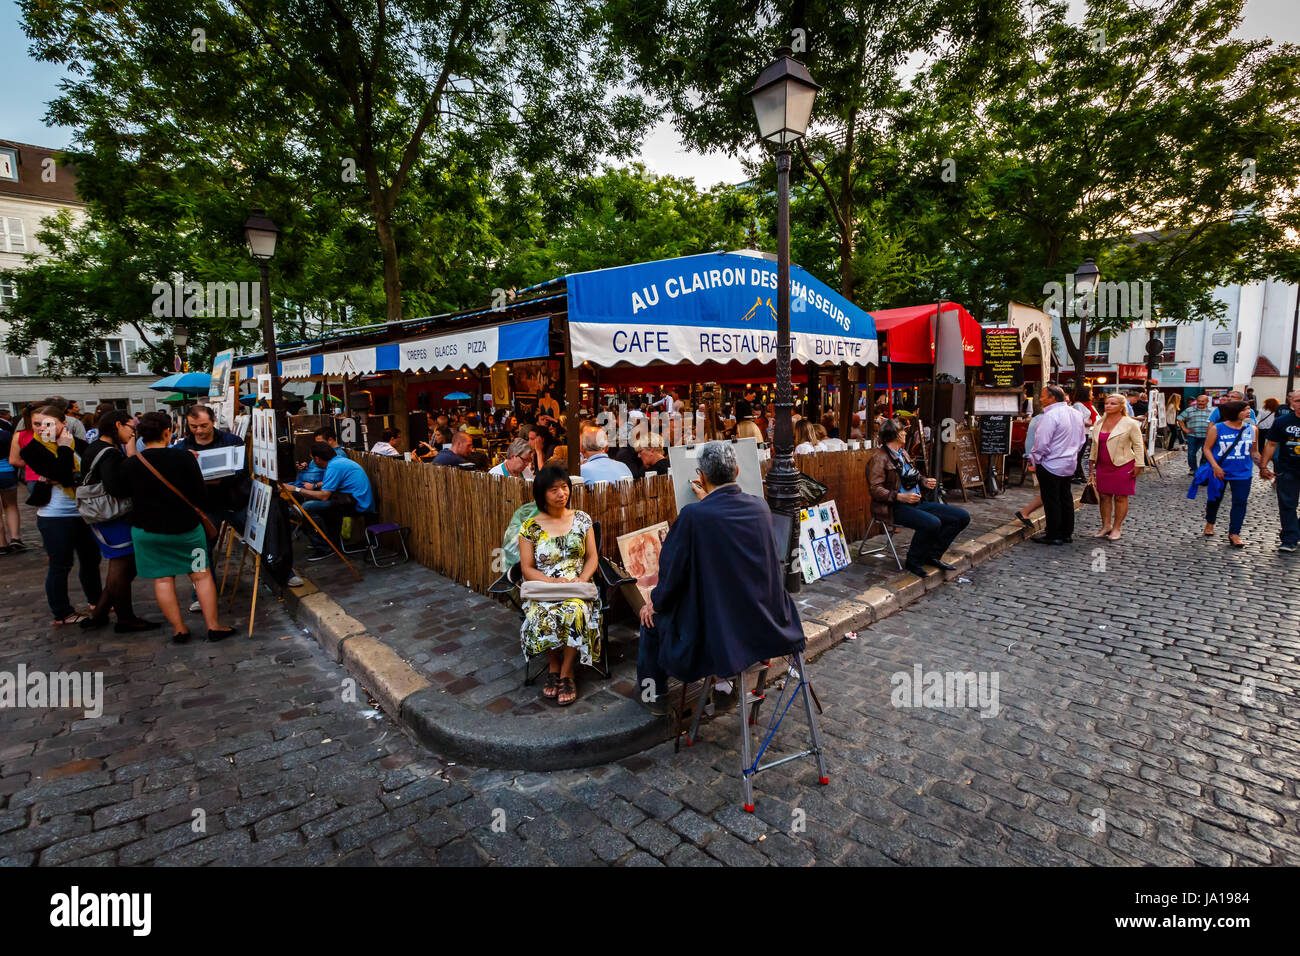 PARIS - JULY 1: Place du Tertre in Montmartre, Paris with street artists and paintings on July 1, 2013. The area once attracted famous modern artists including Picasso and Dali. Stock Photo